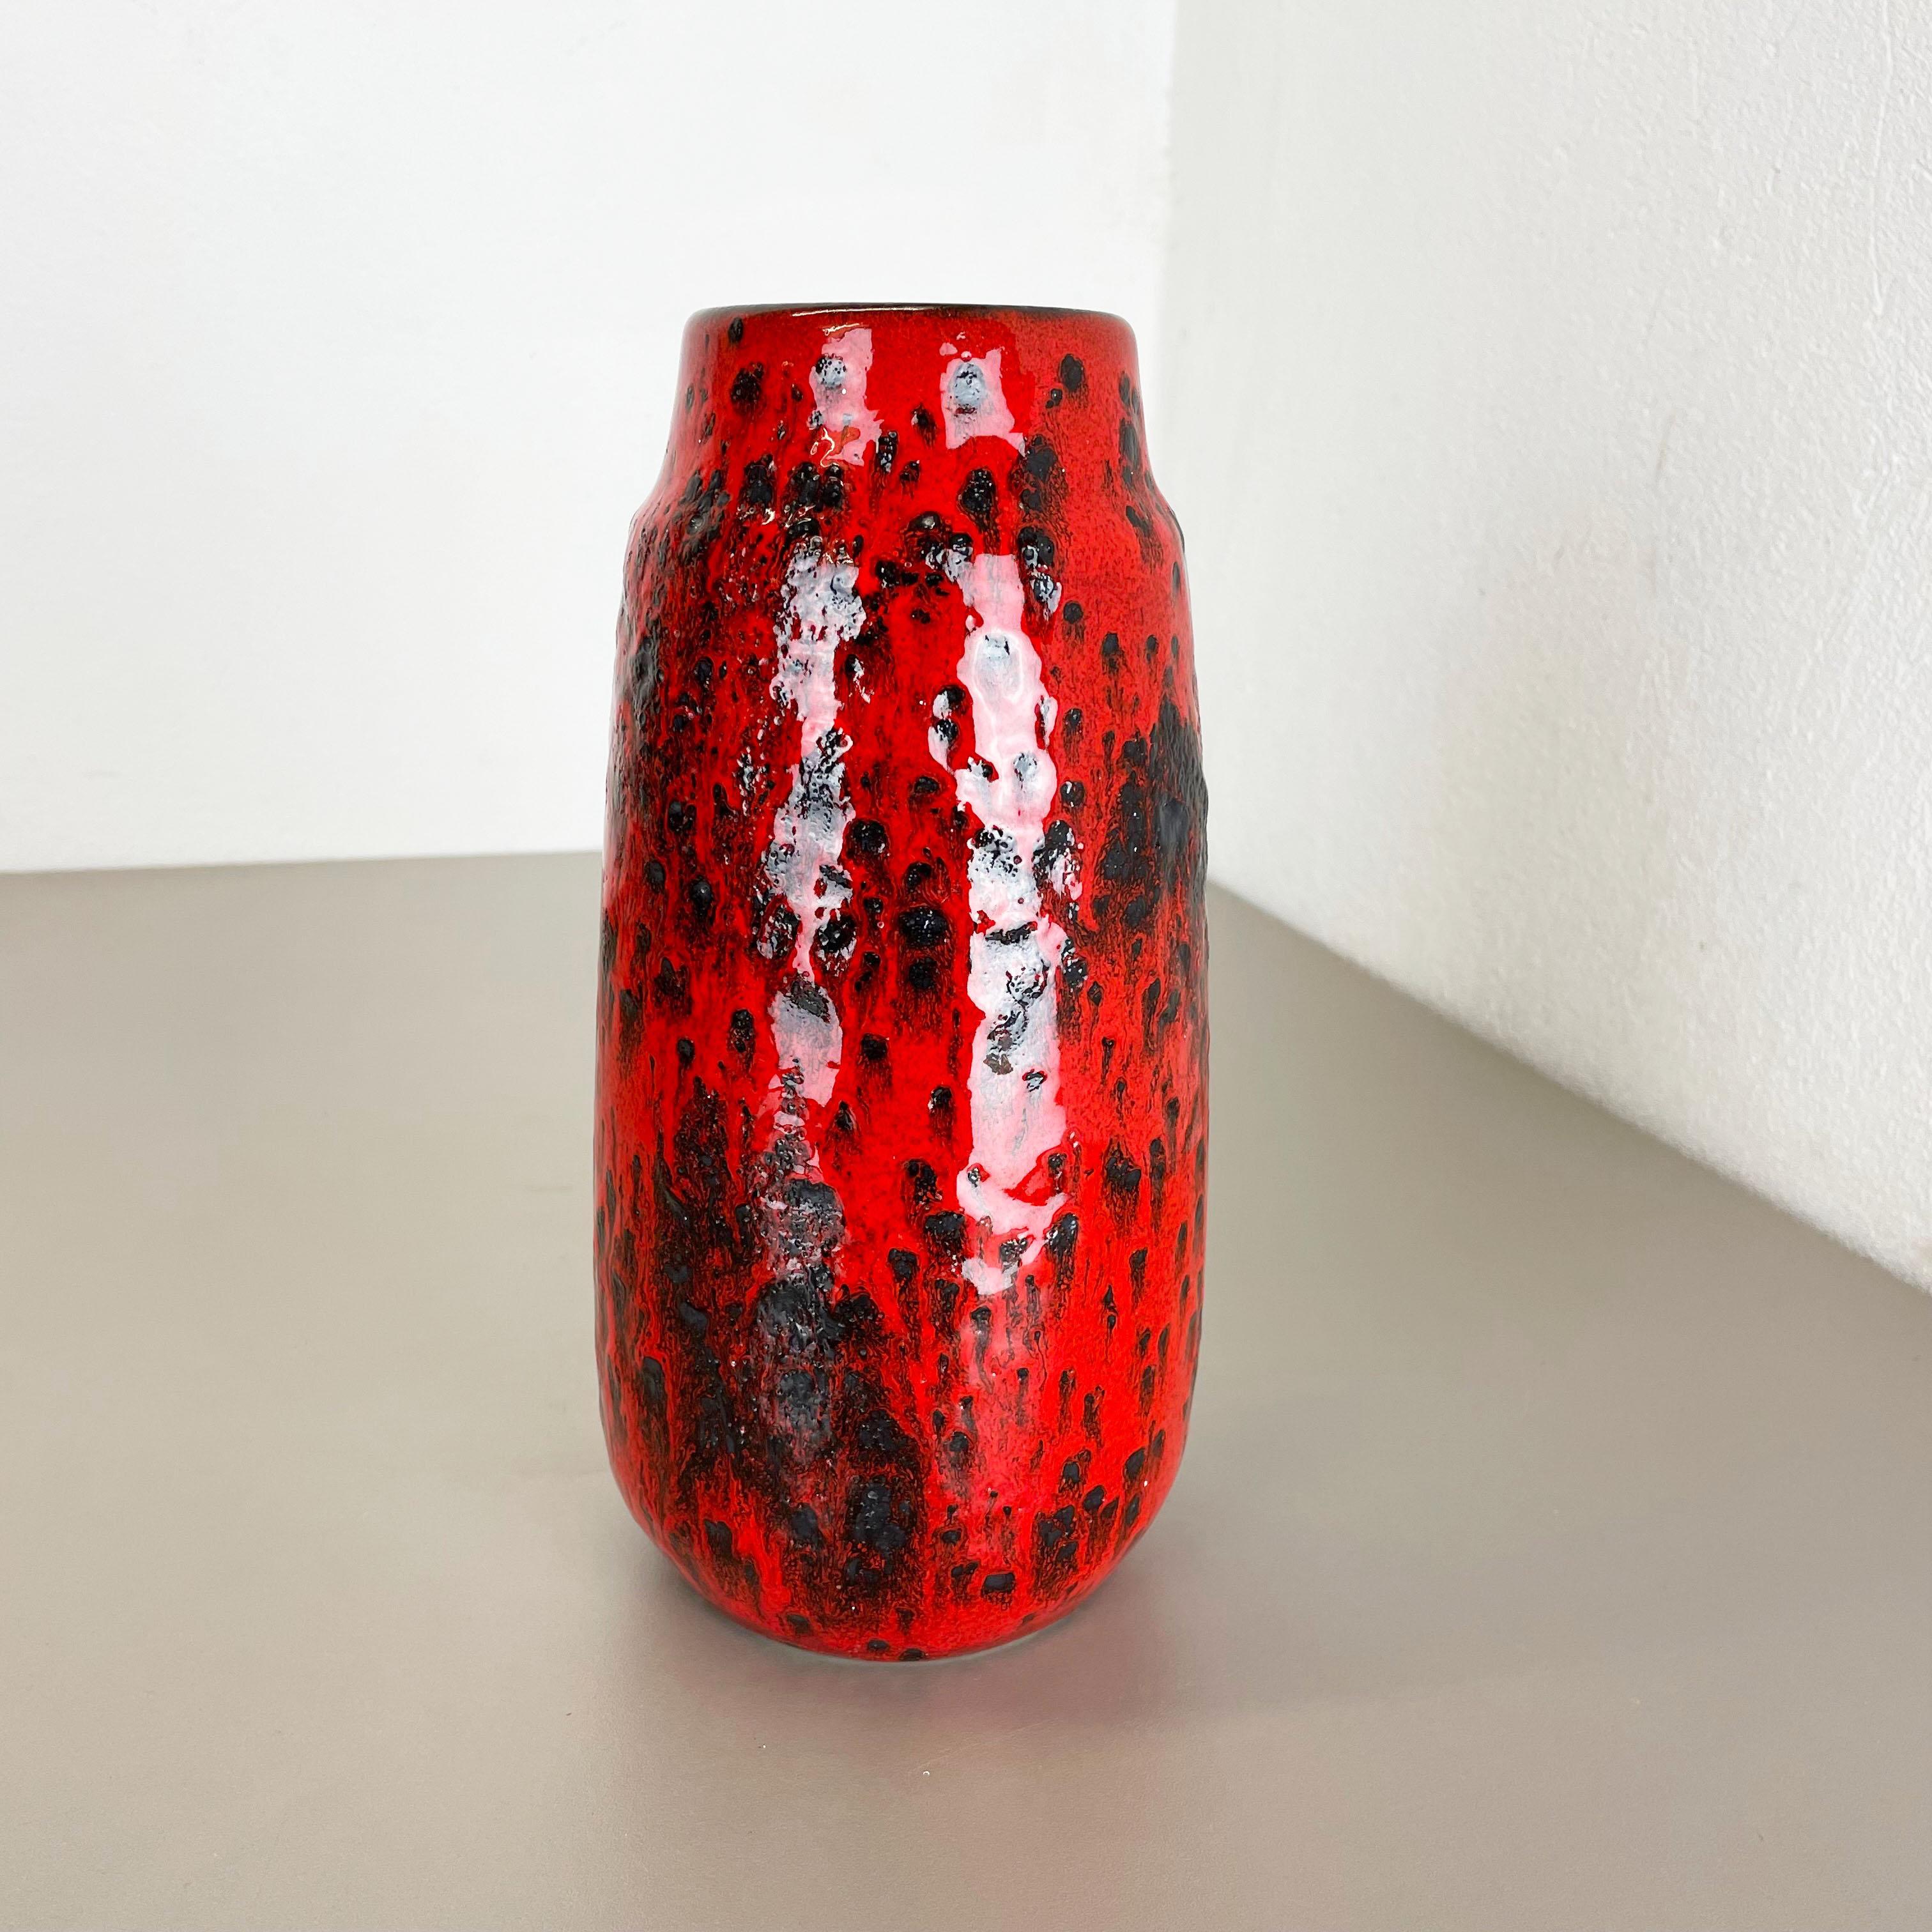 Article:

Fat lava art vase, heavy Brutalist glaze


Producer:

Scheurich, Germany



Decade:

1970s




This original vintage vase was produced in the 1970s in Germany. It is made of ceramic pottery in fat lava optic with abstract illustration in